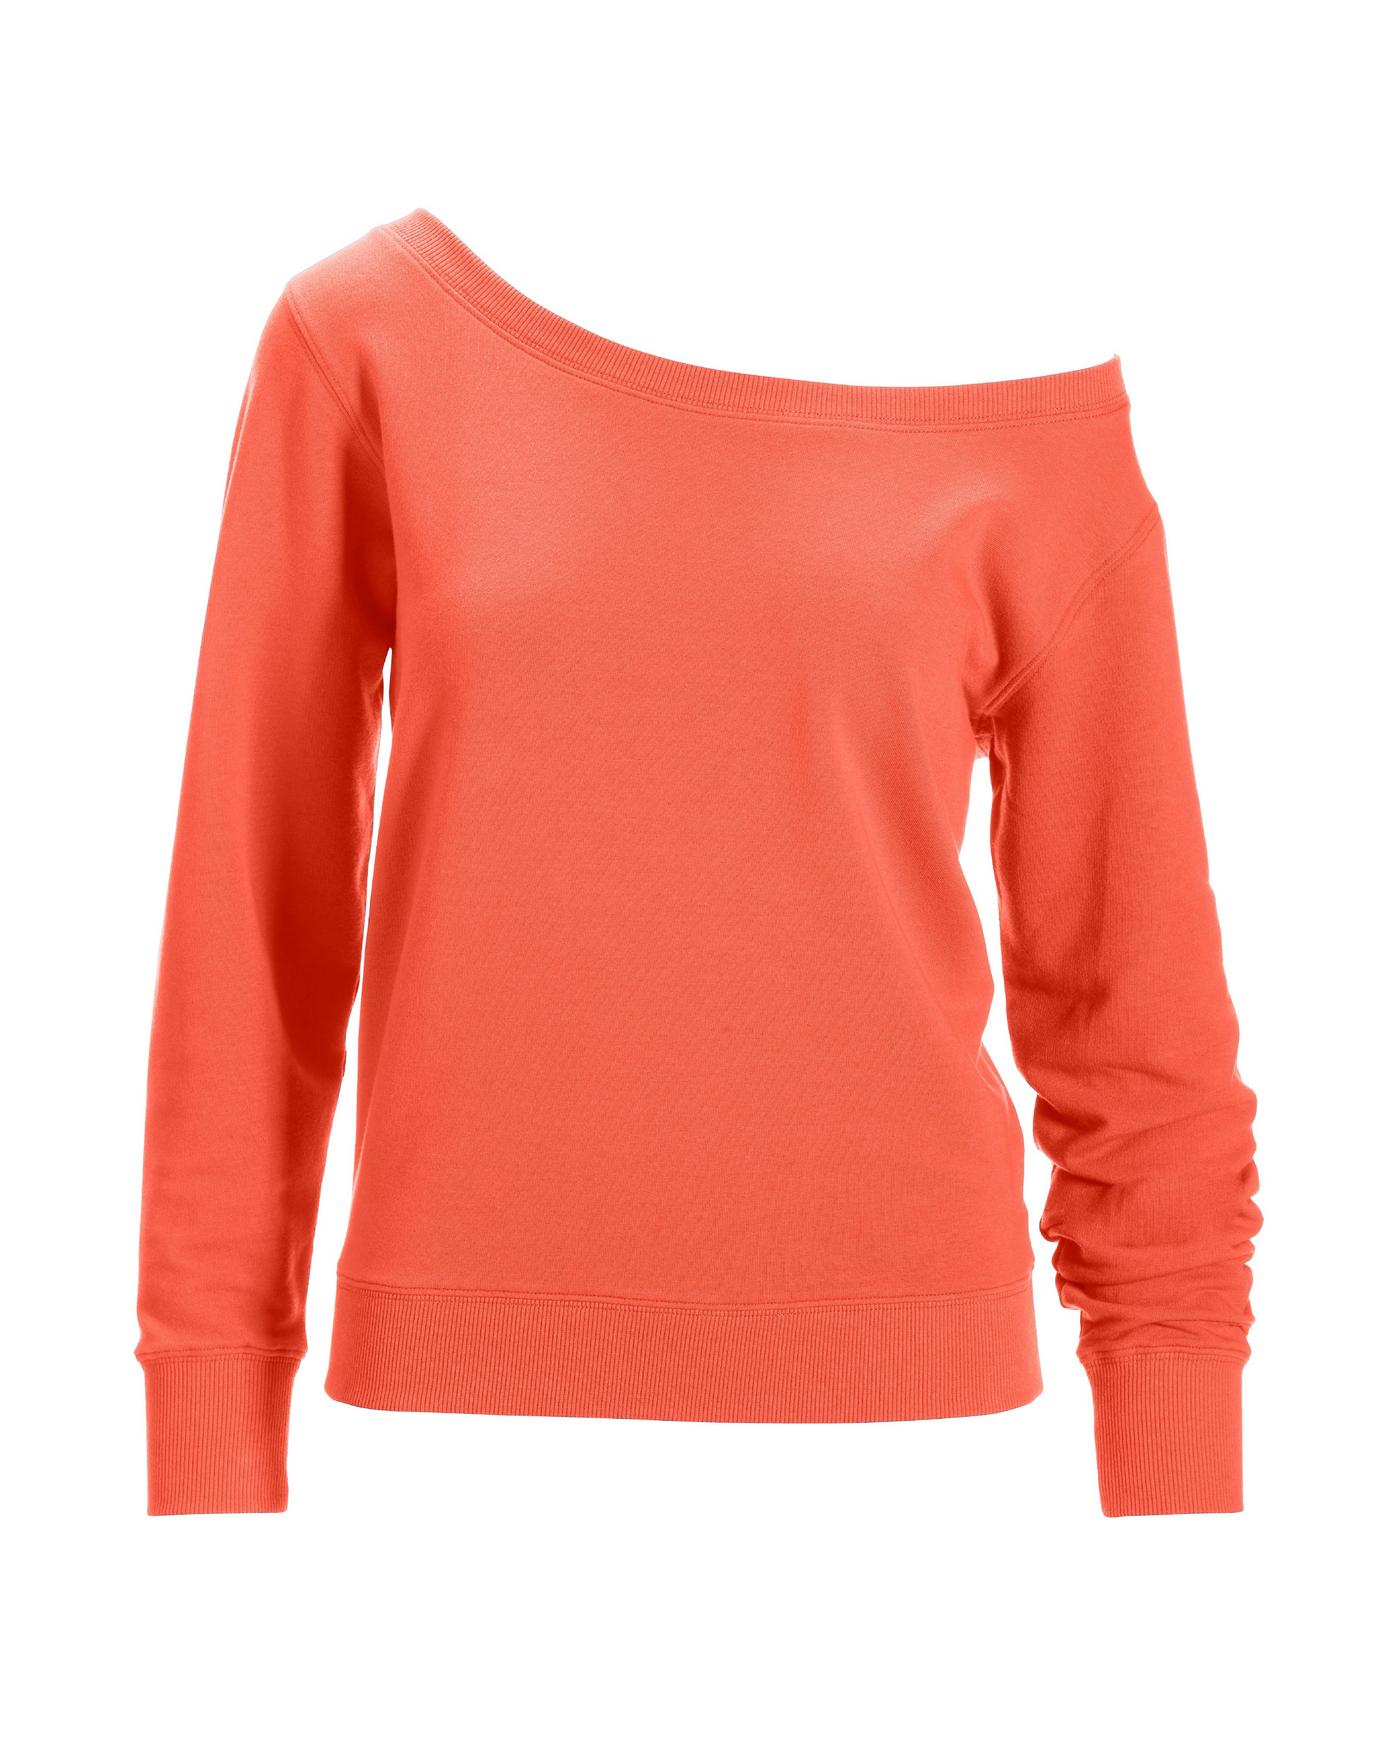 Slouchy Pullover Orange - Boston Terry Sweatshirt Hot | French Proper Coral